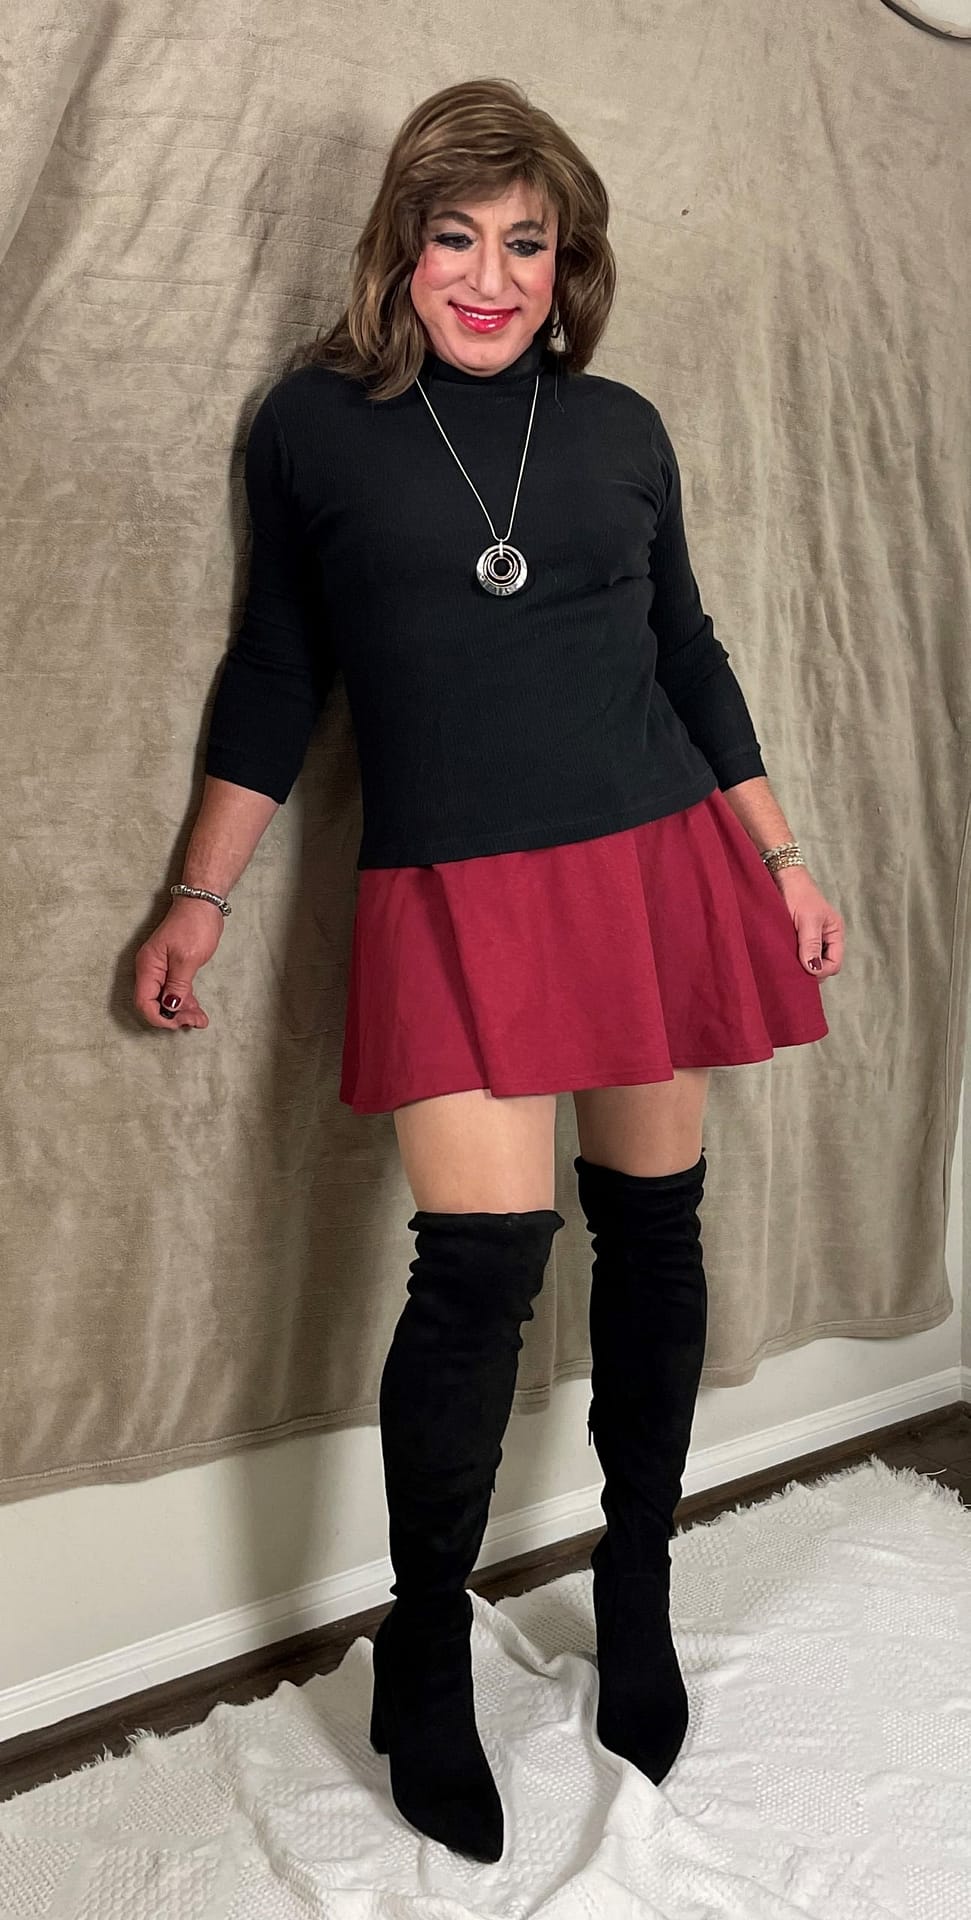 Another simple outfit with over-the-knee boots – Crossdresser Heaven